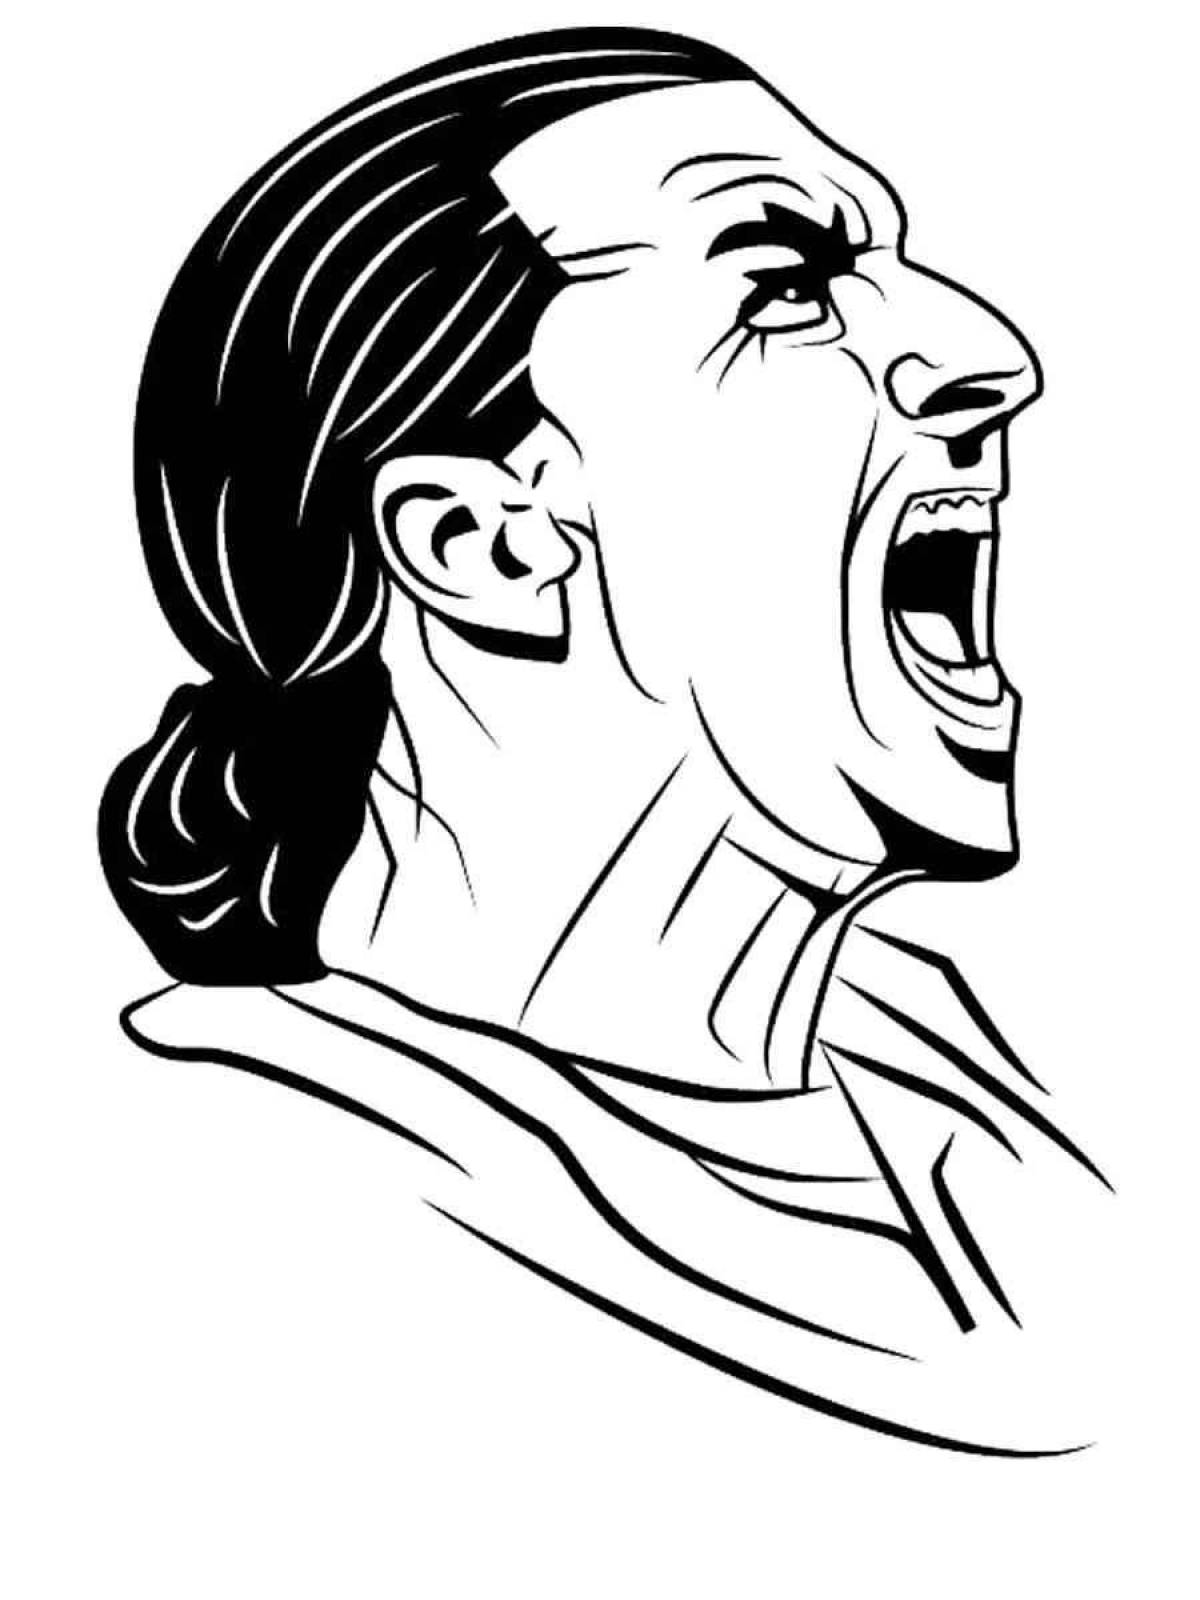 Zlatan Ibrahimovic's colorfully illustrated coloring page